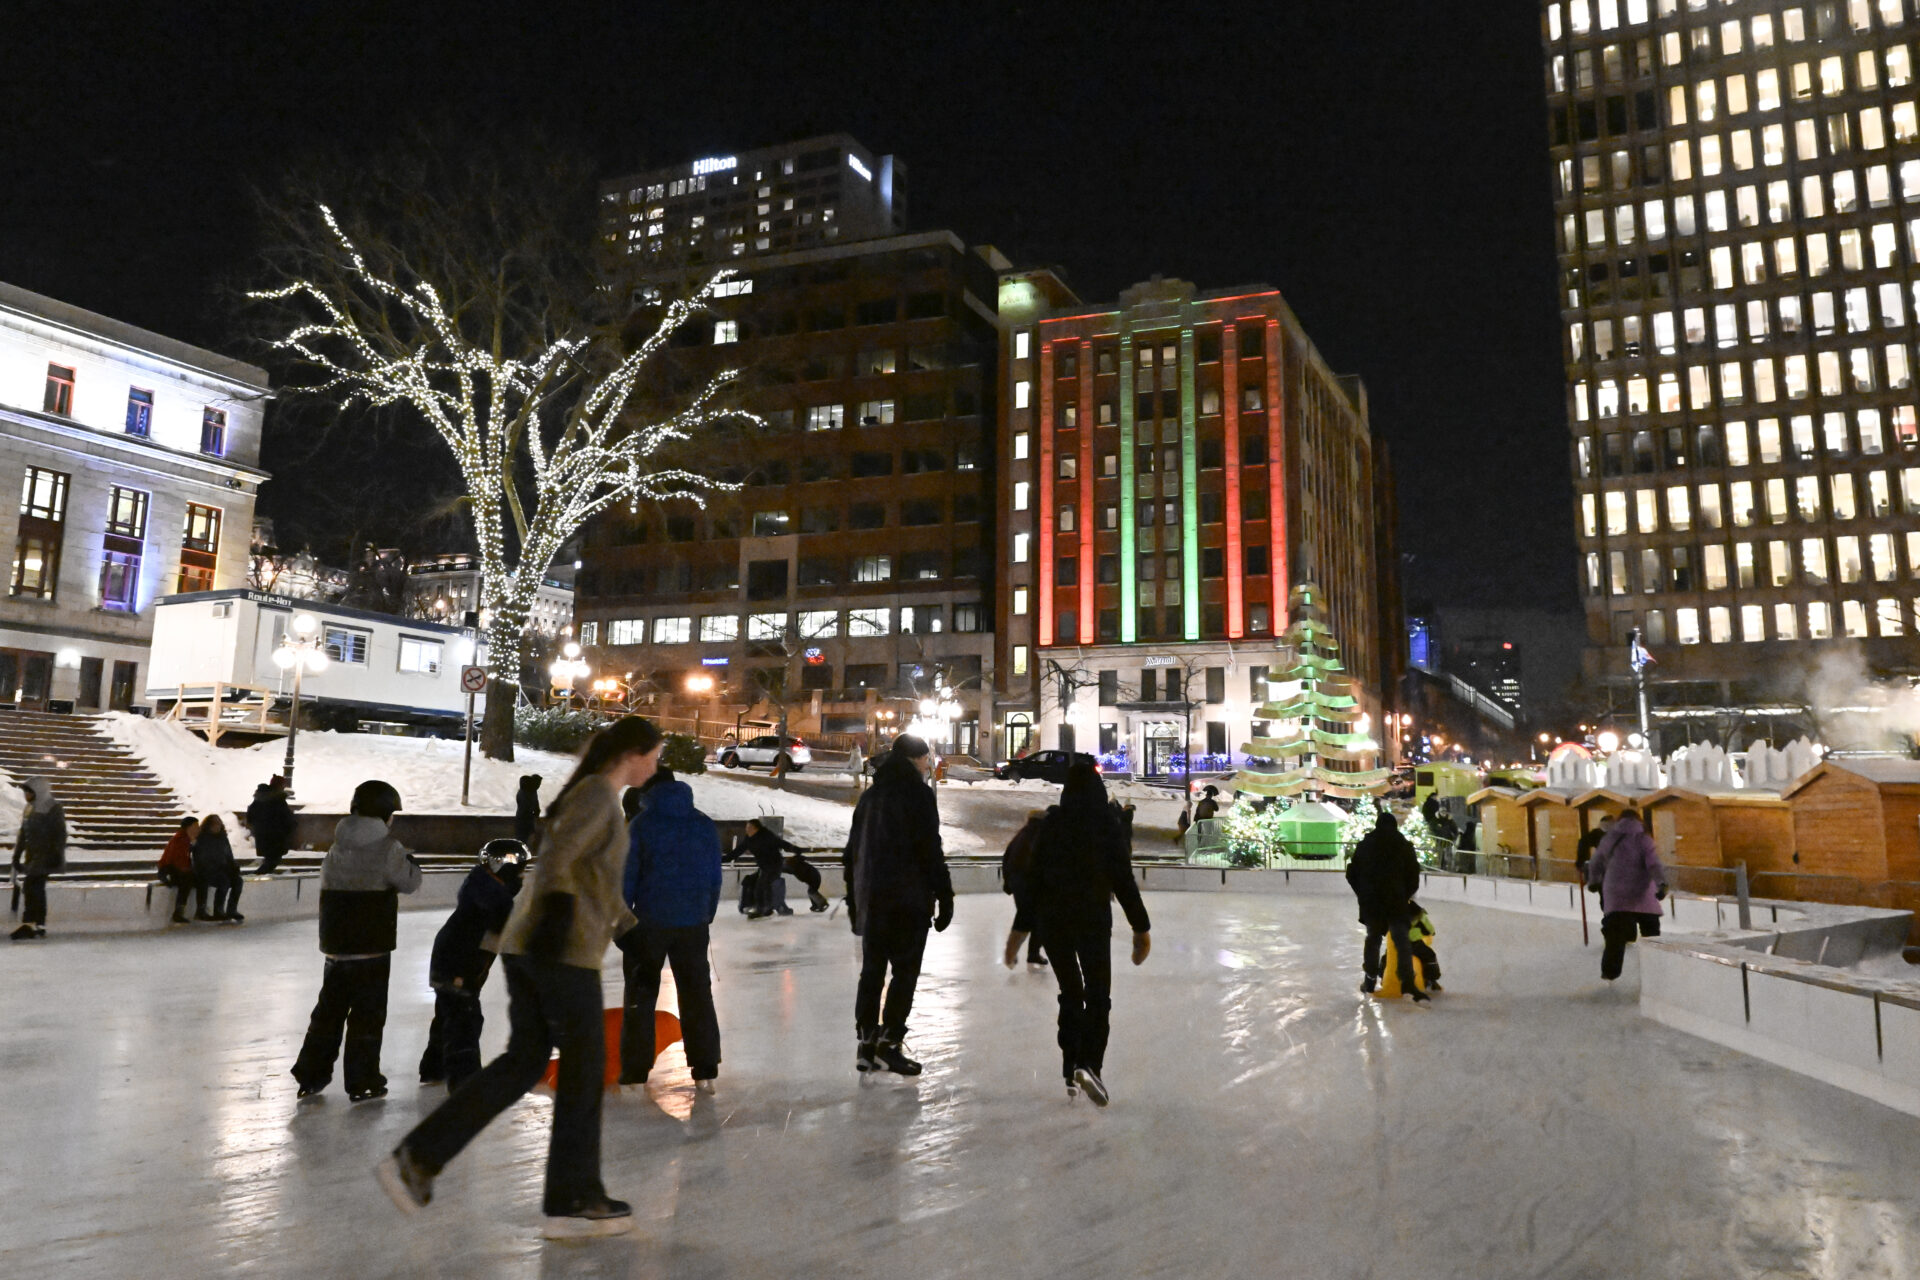 Ten or 12 people skate on ice surrounded by three buildings of varying size. One is a tower, another is several storeys high. One is decorated in red and green lights, and a tree is lit with white lights.